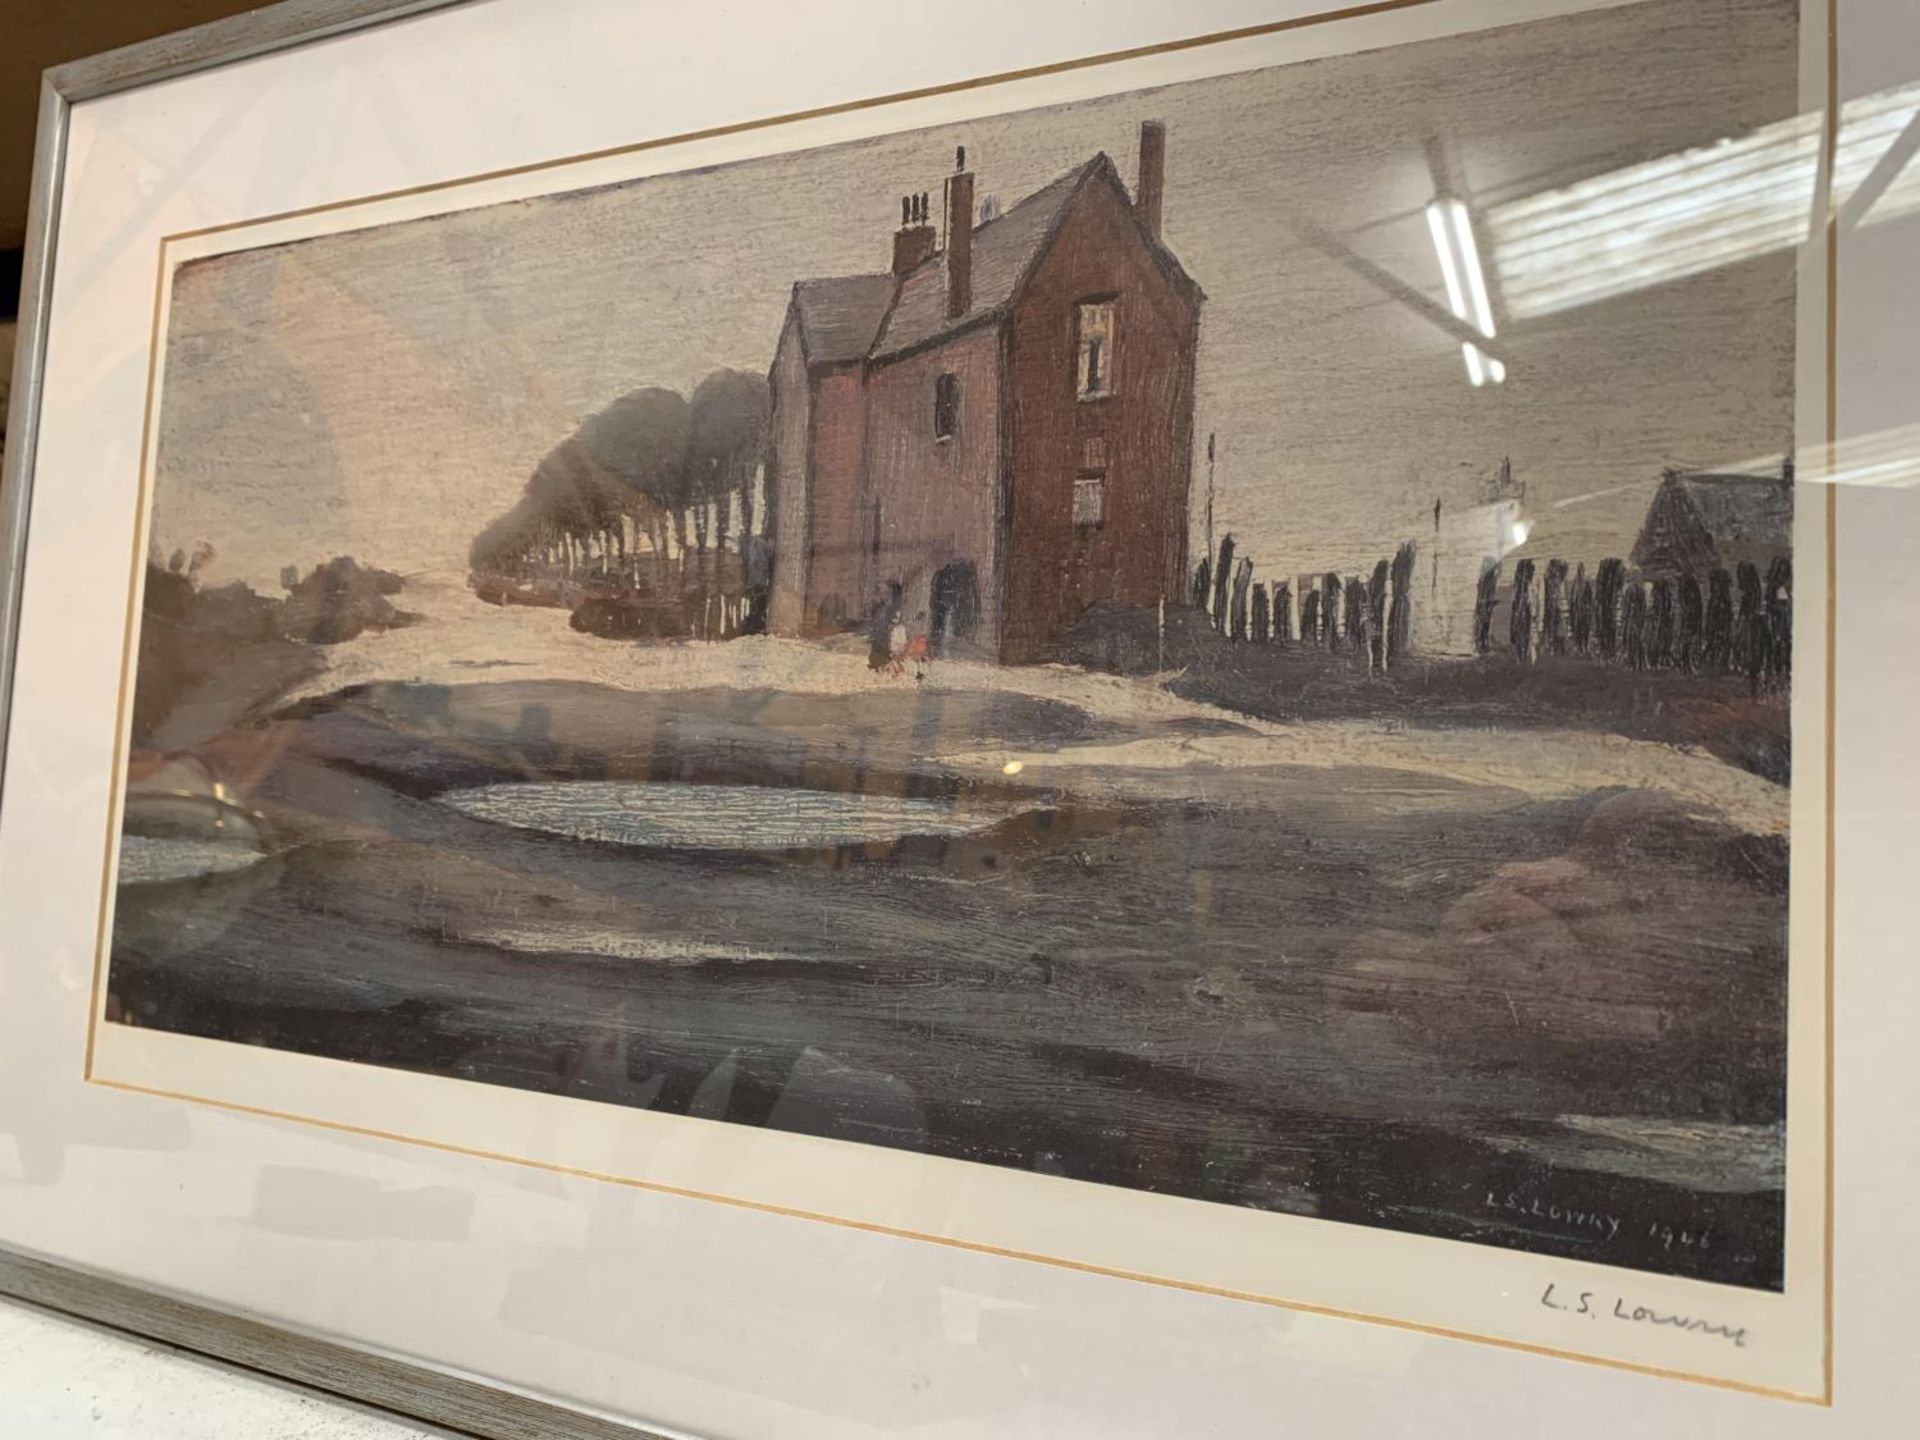 A LAURENCE STEPHEN LOWRY R.A (1887-1976) 'THE LONELY HOUSE' SIGNED IN PENCIL WITH MAGNUS PRINTS - Image 2 of 4